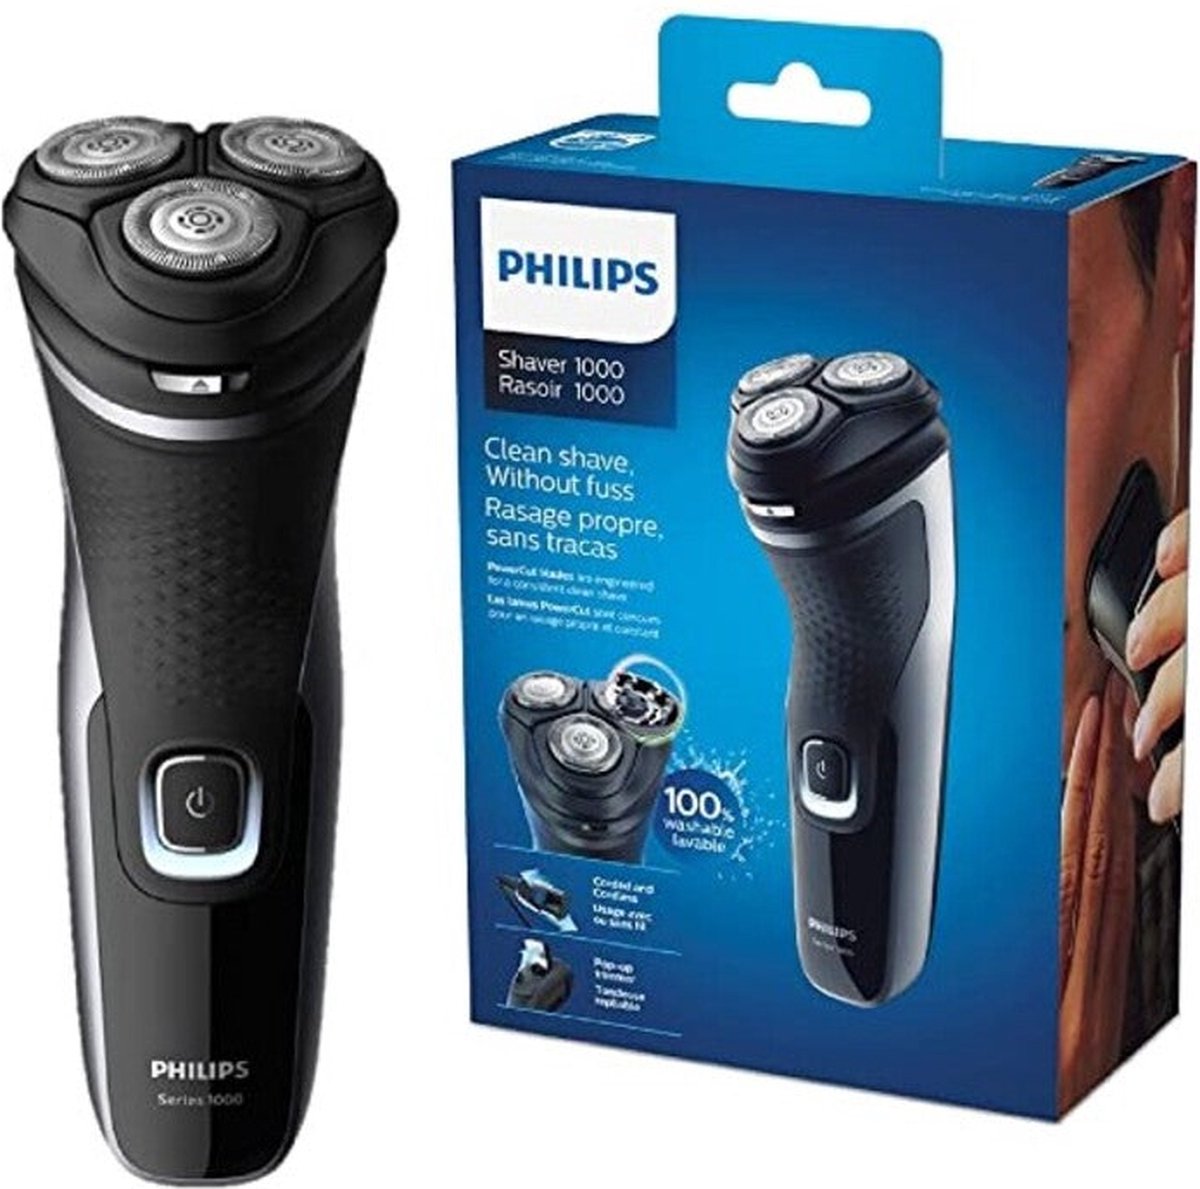 4. Philips Shaver 1000 S1332/41